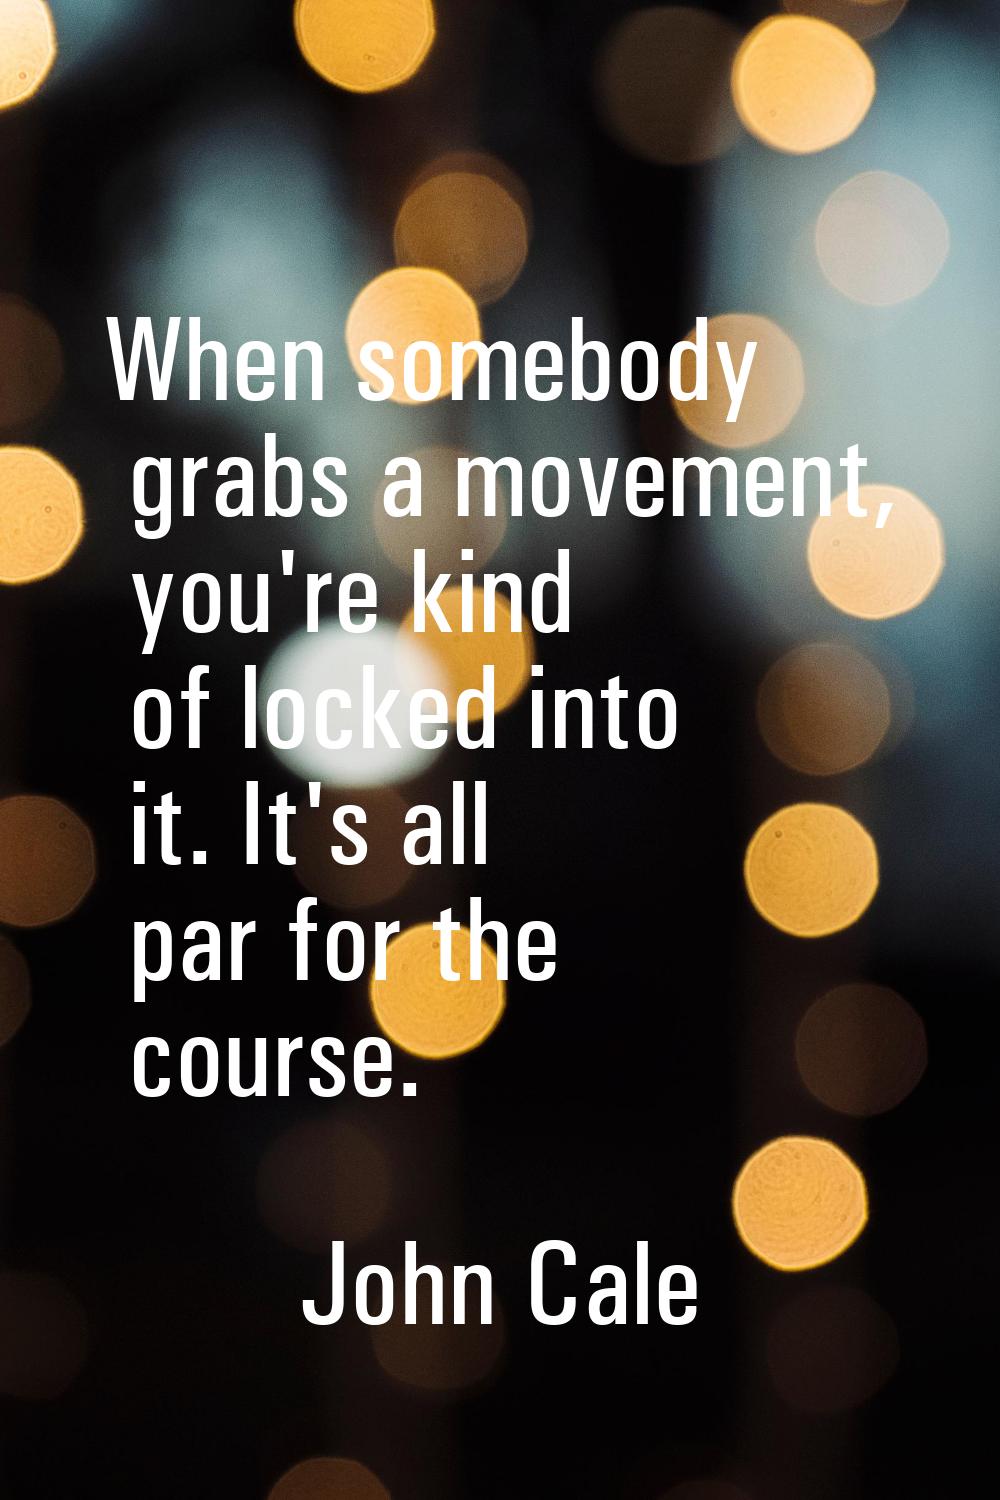 When somebody grabs a movement, you're kind of locked into it. It's all par for the course.